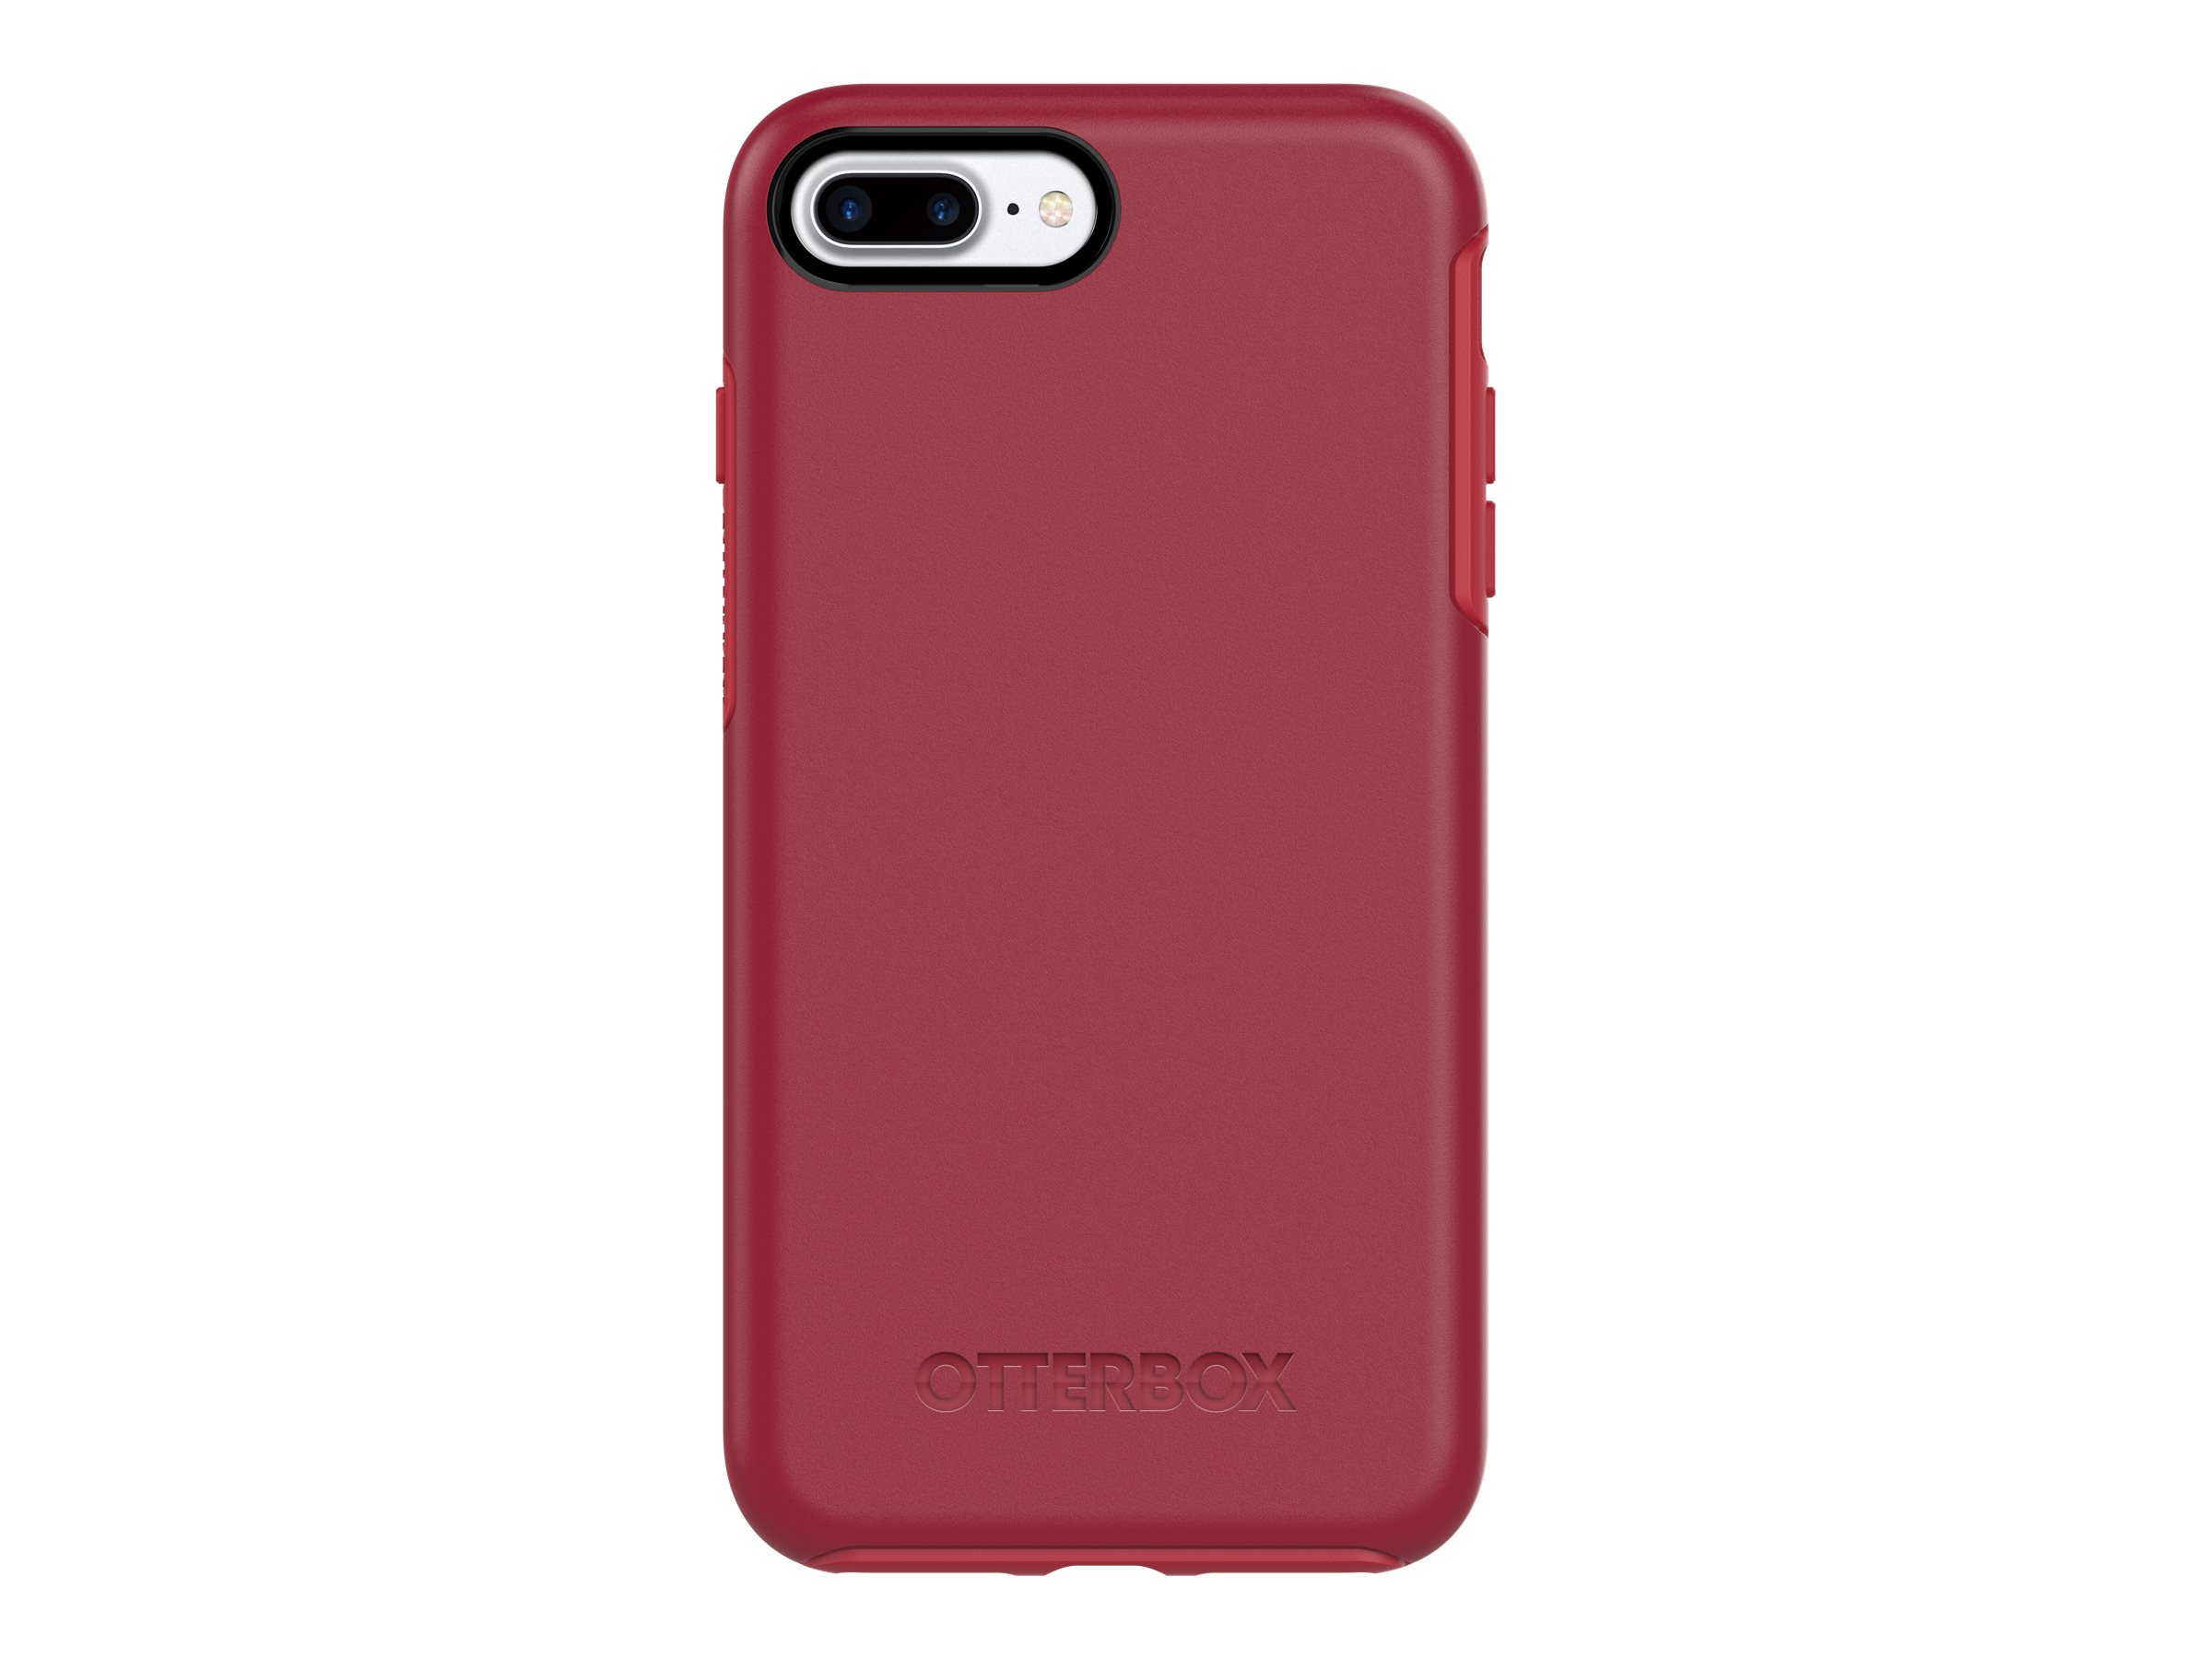 OtterBox Symmetry Series Case for Apple iPhone 7 Plus, Rosso Corsa - image 3 of 8